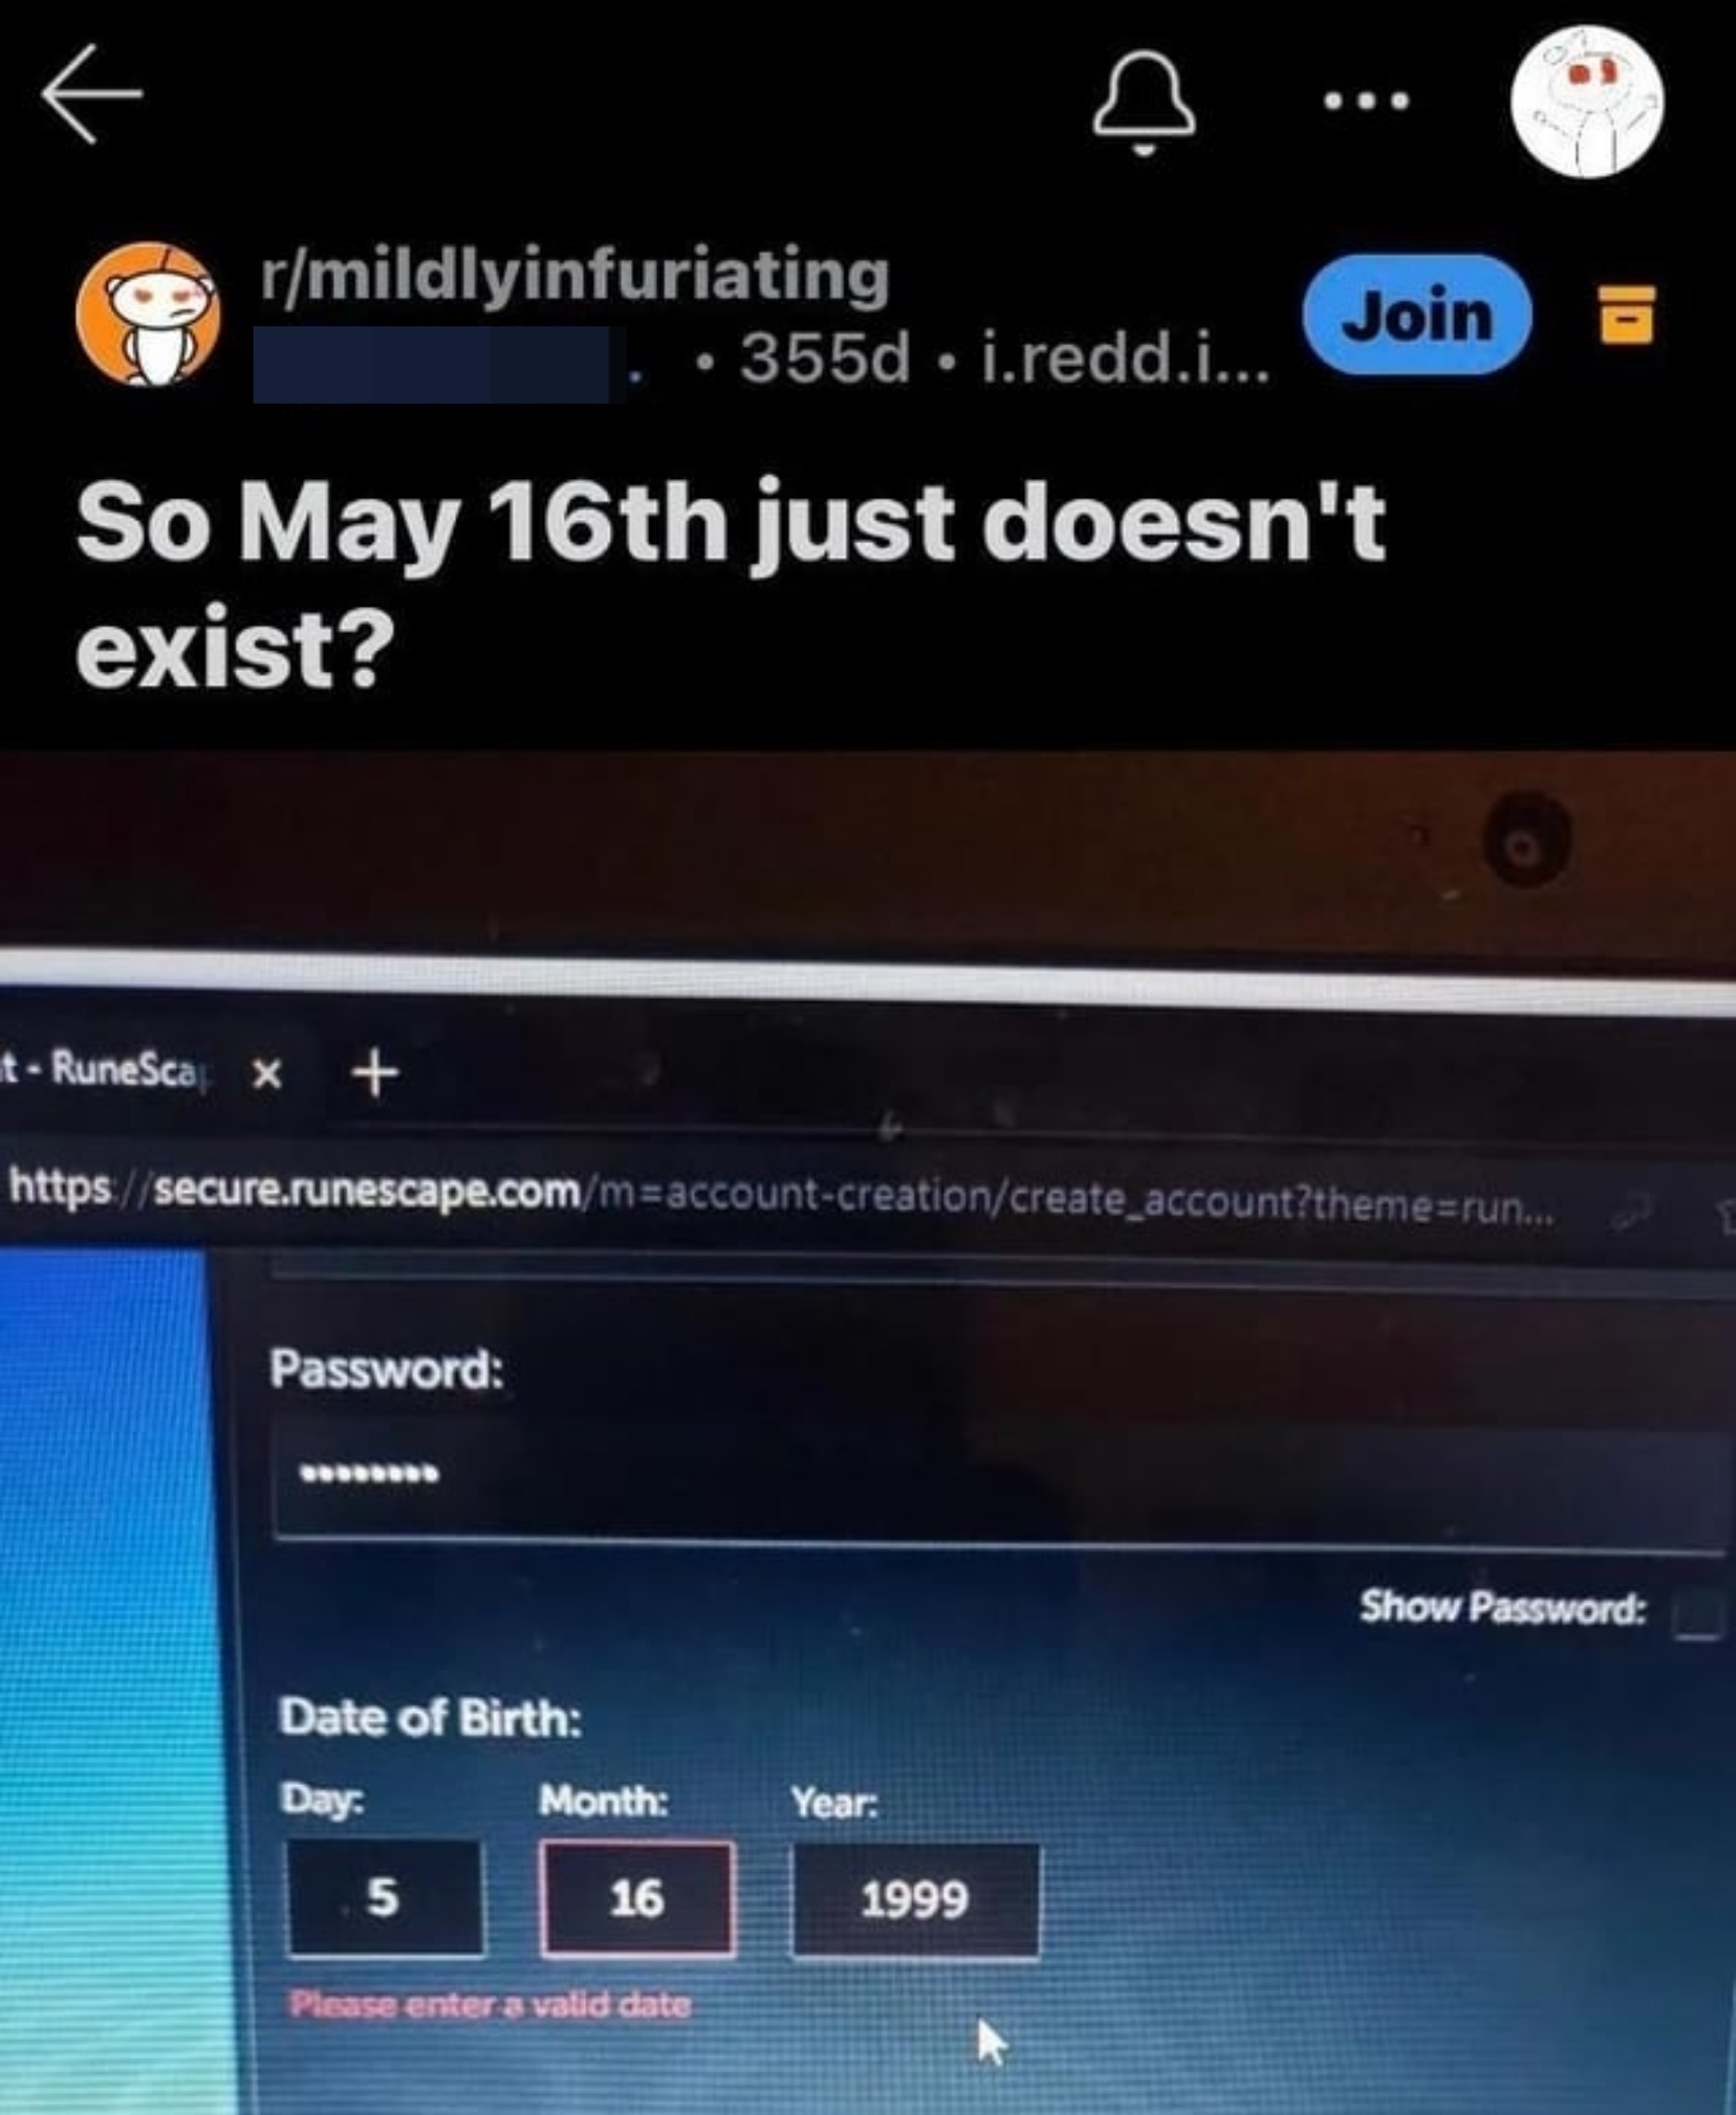 A Reddit post that says &quot;so May 16 doesn&#x27;t exist?&quot; because they entered the date as 5/16, but the verification form was asking for the day first, then the month